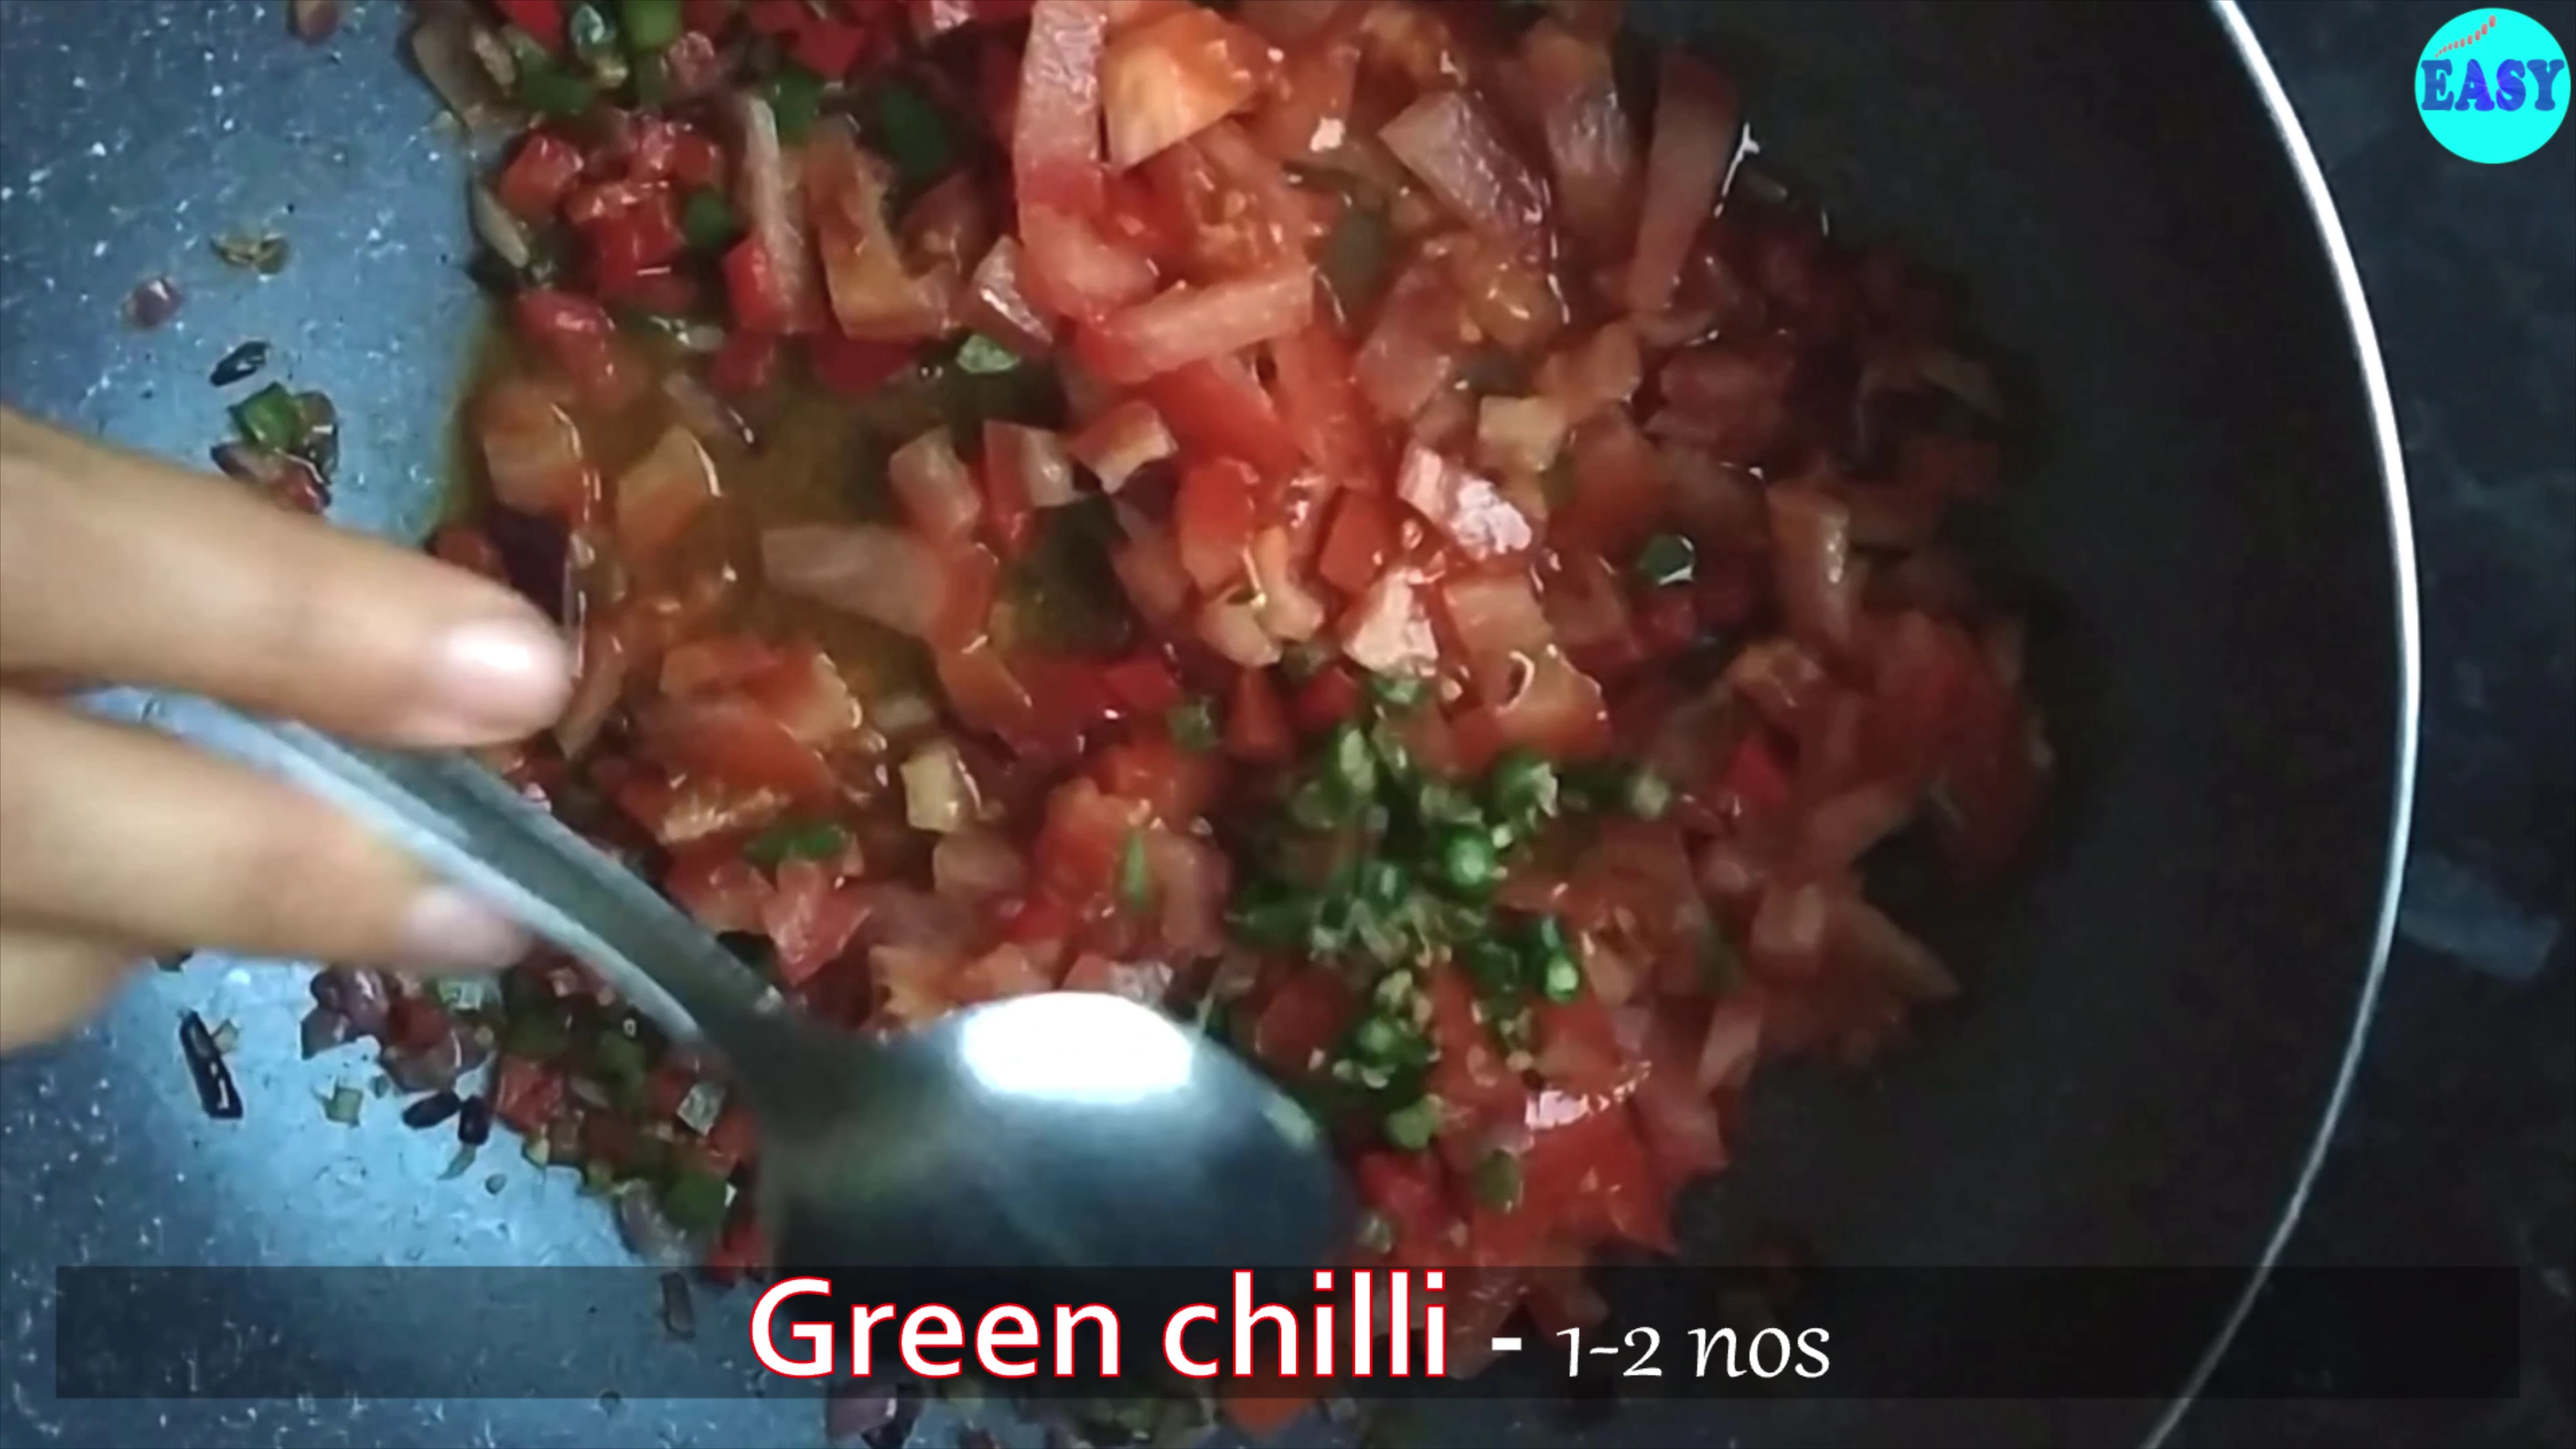 Step 7 - Now add tomatoes, green chillies and salt. Mix it well, cover and cook on medium heat until tomatoes are tender.